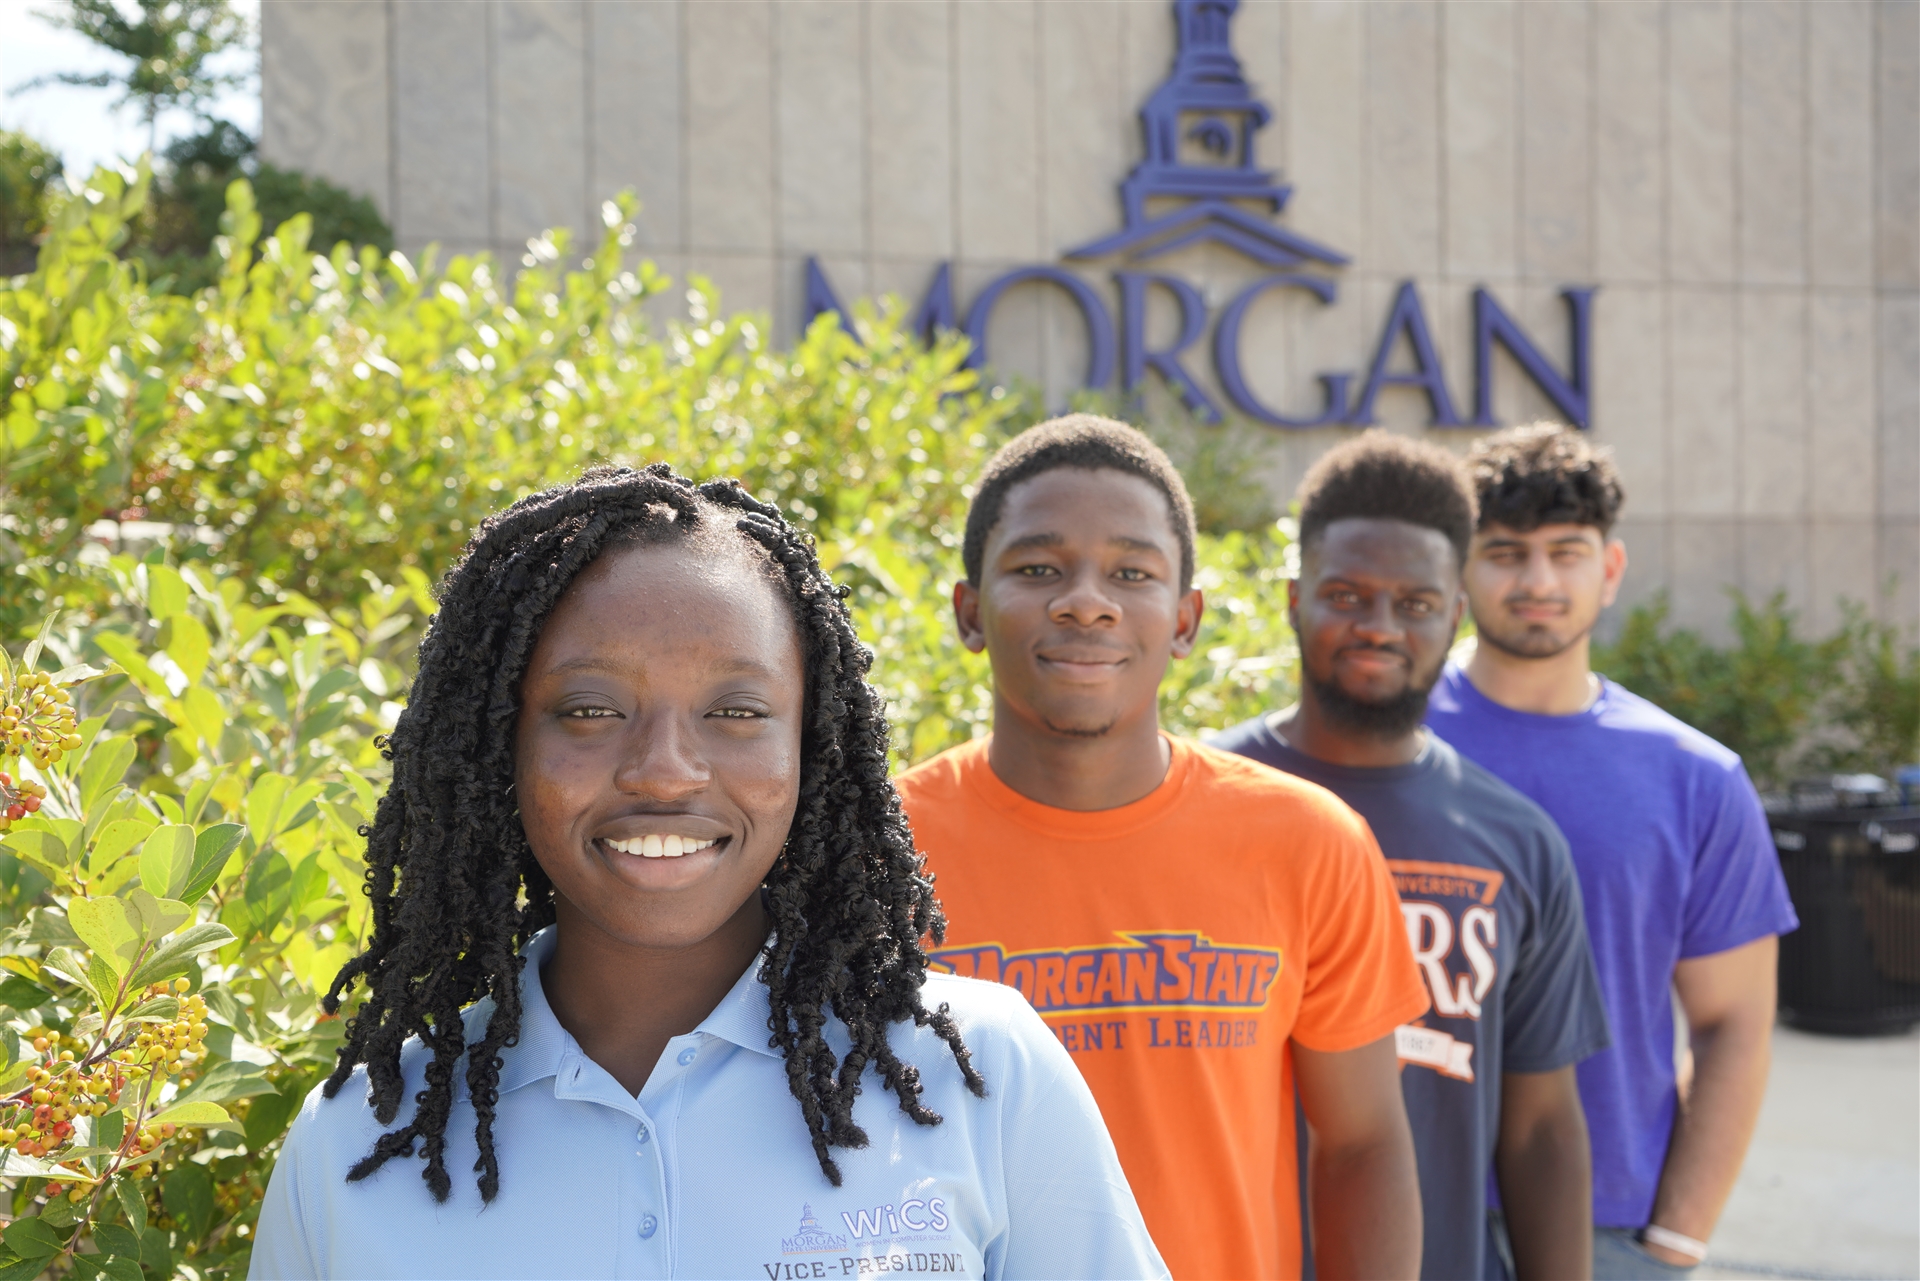 Morgan State University on LinkedIn: Morgan Students Take Second Place in  AT&T HBCU Innovation Challenge…